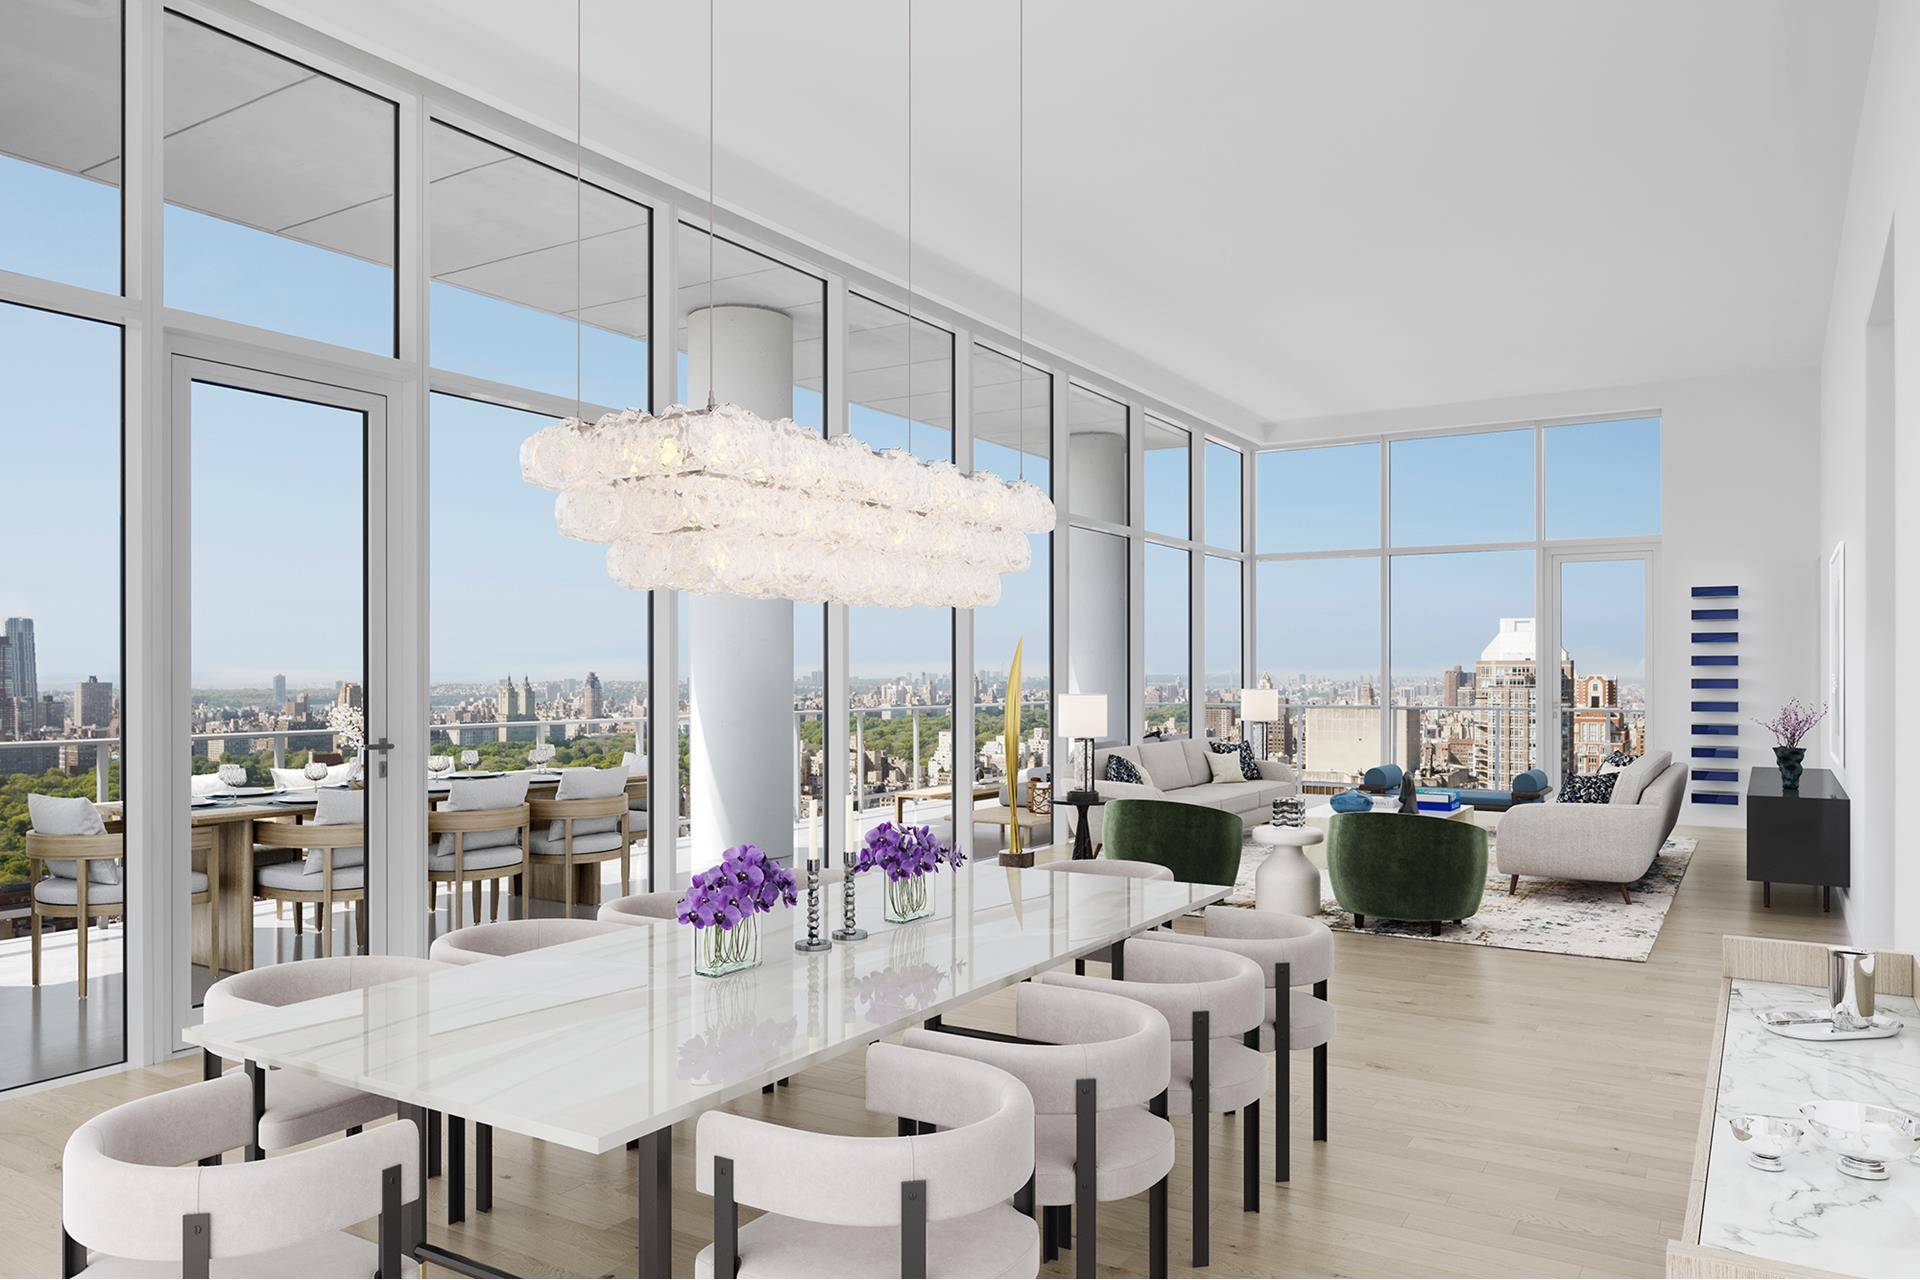 Introducing Penthouse 32, an unparalleled, three bedroom, three and a half bath full floor residence with 14' finished ceilings, and 148 linear feet of continuous terrace with 360 degree views ...